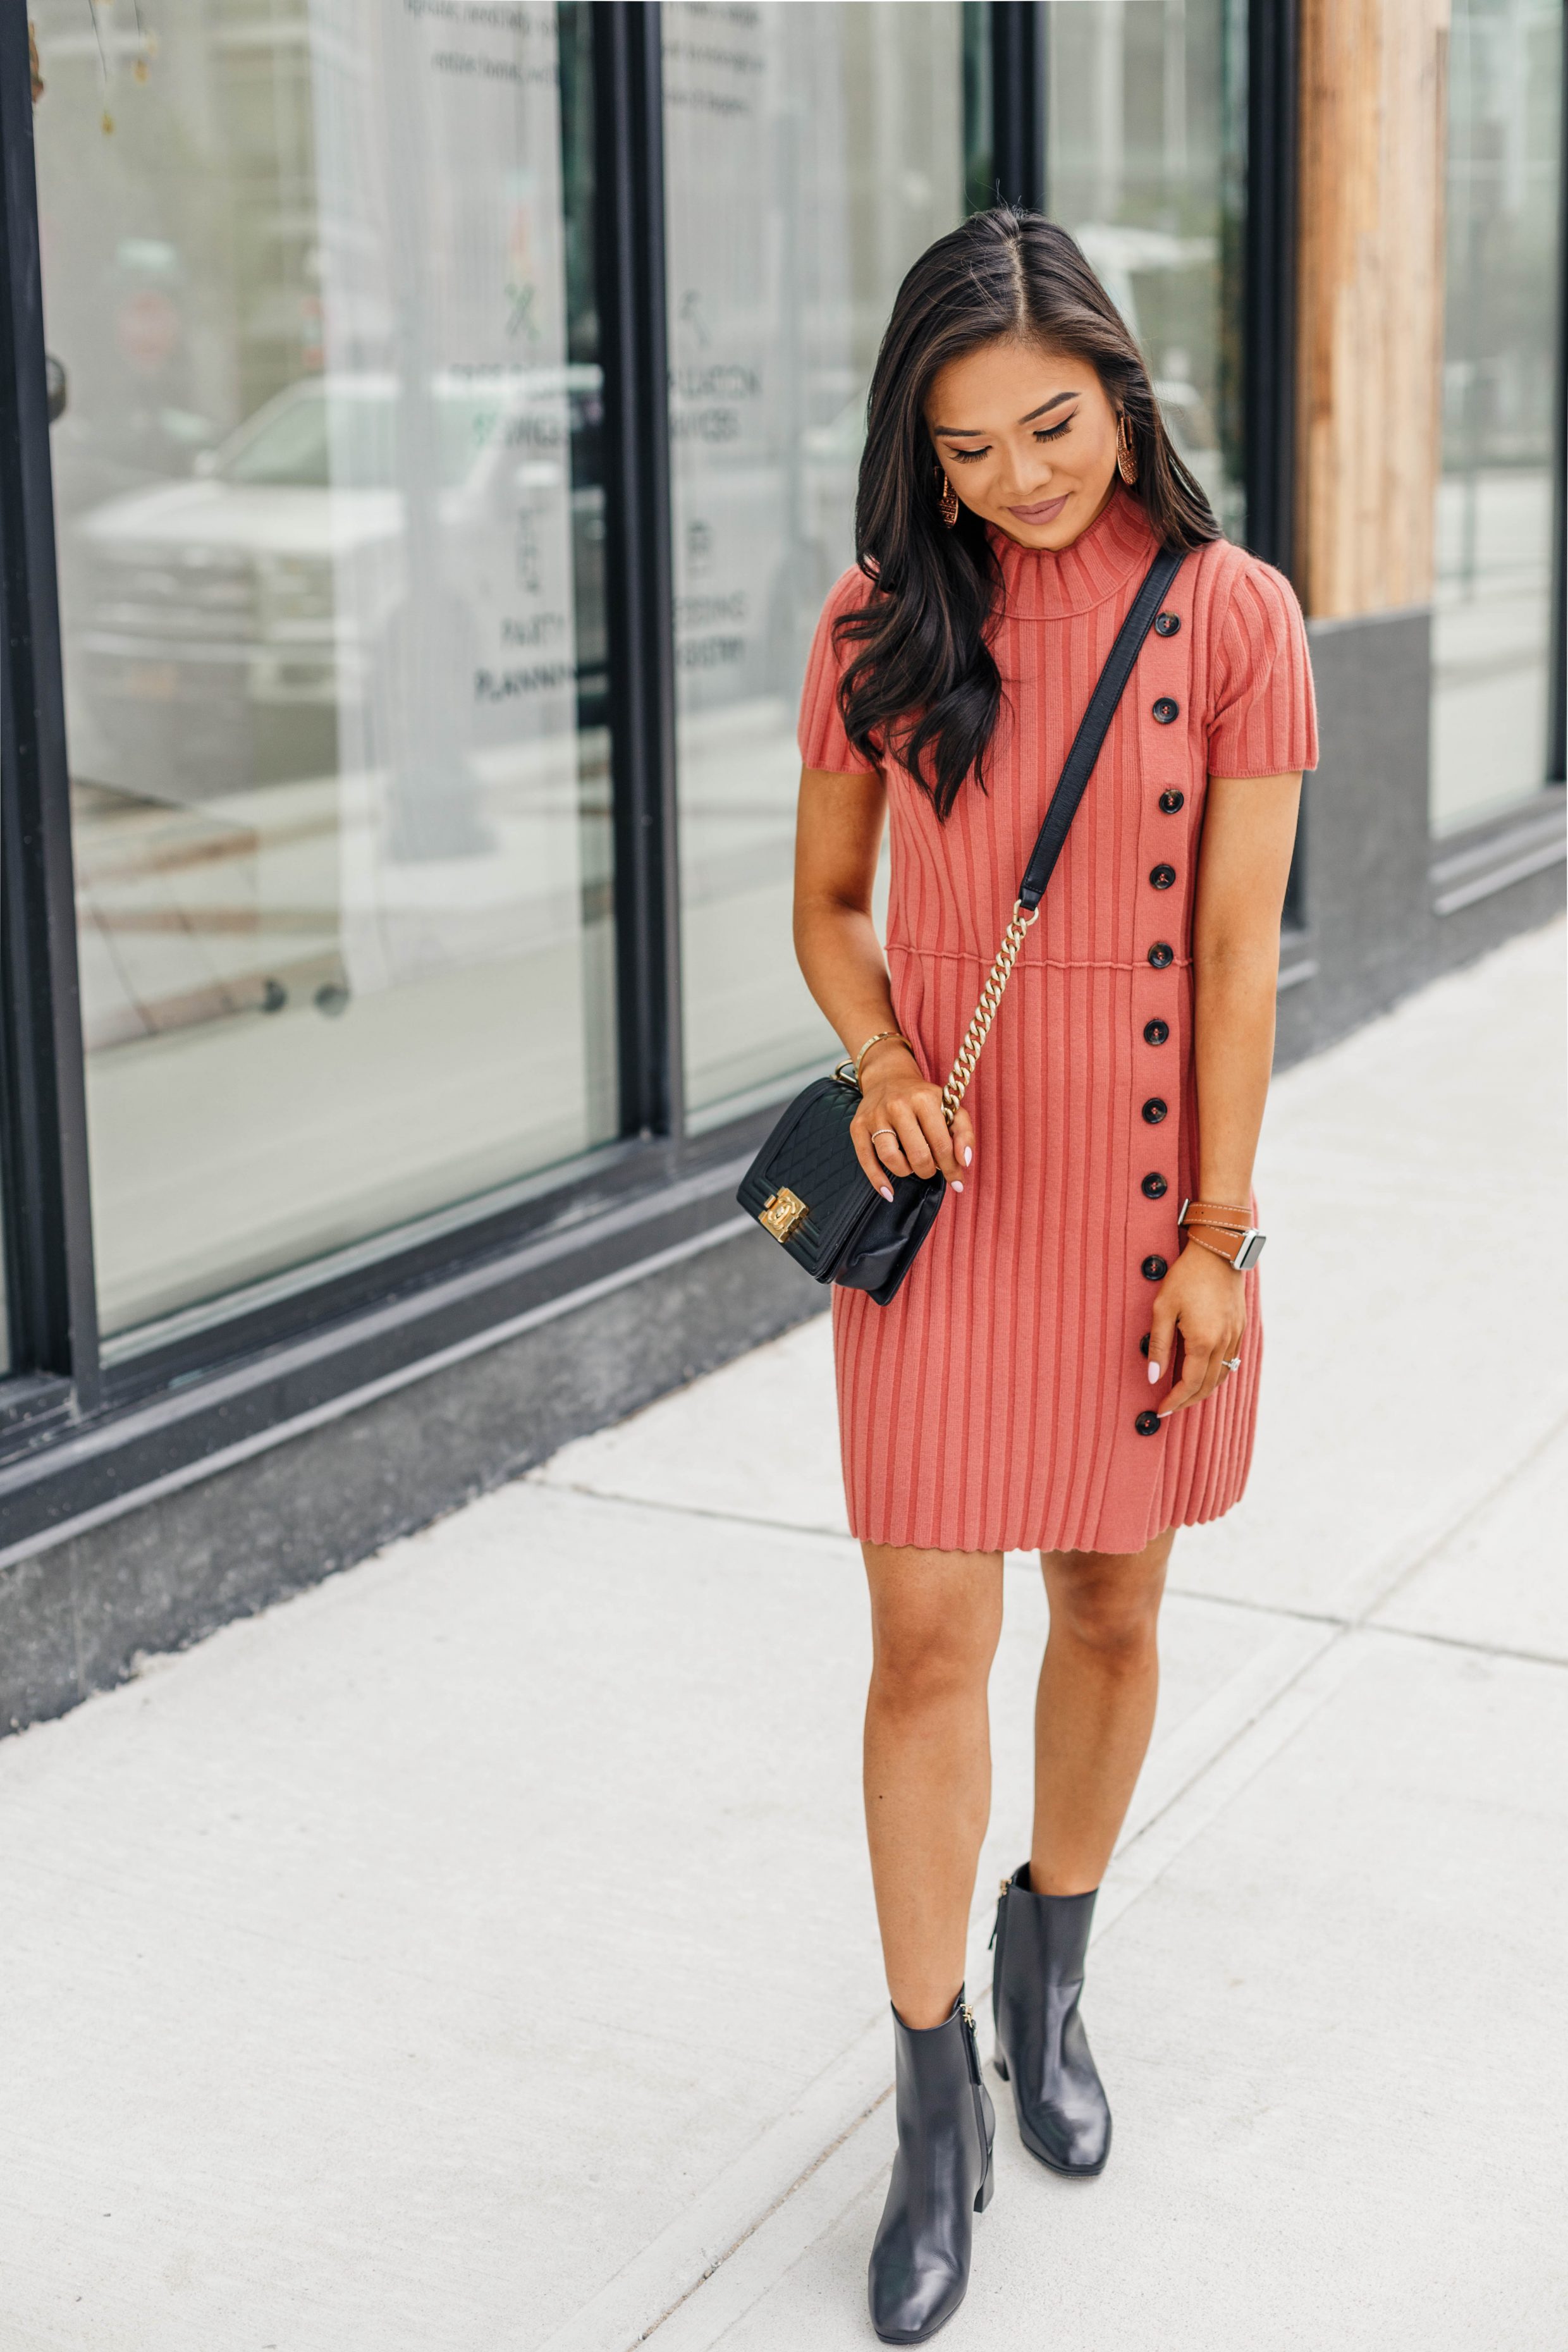 Blogger Hoang-Kim styles the Corsa bootie for fall with a coral ribbed dress